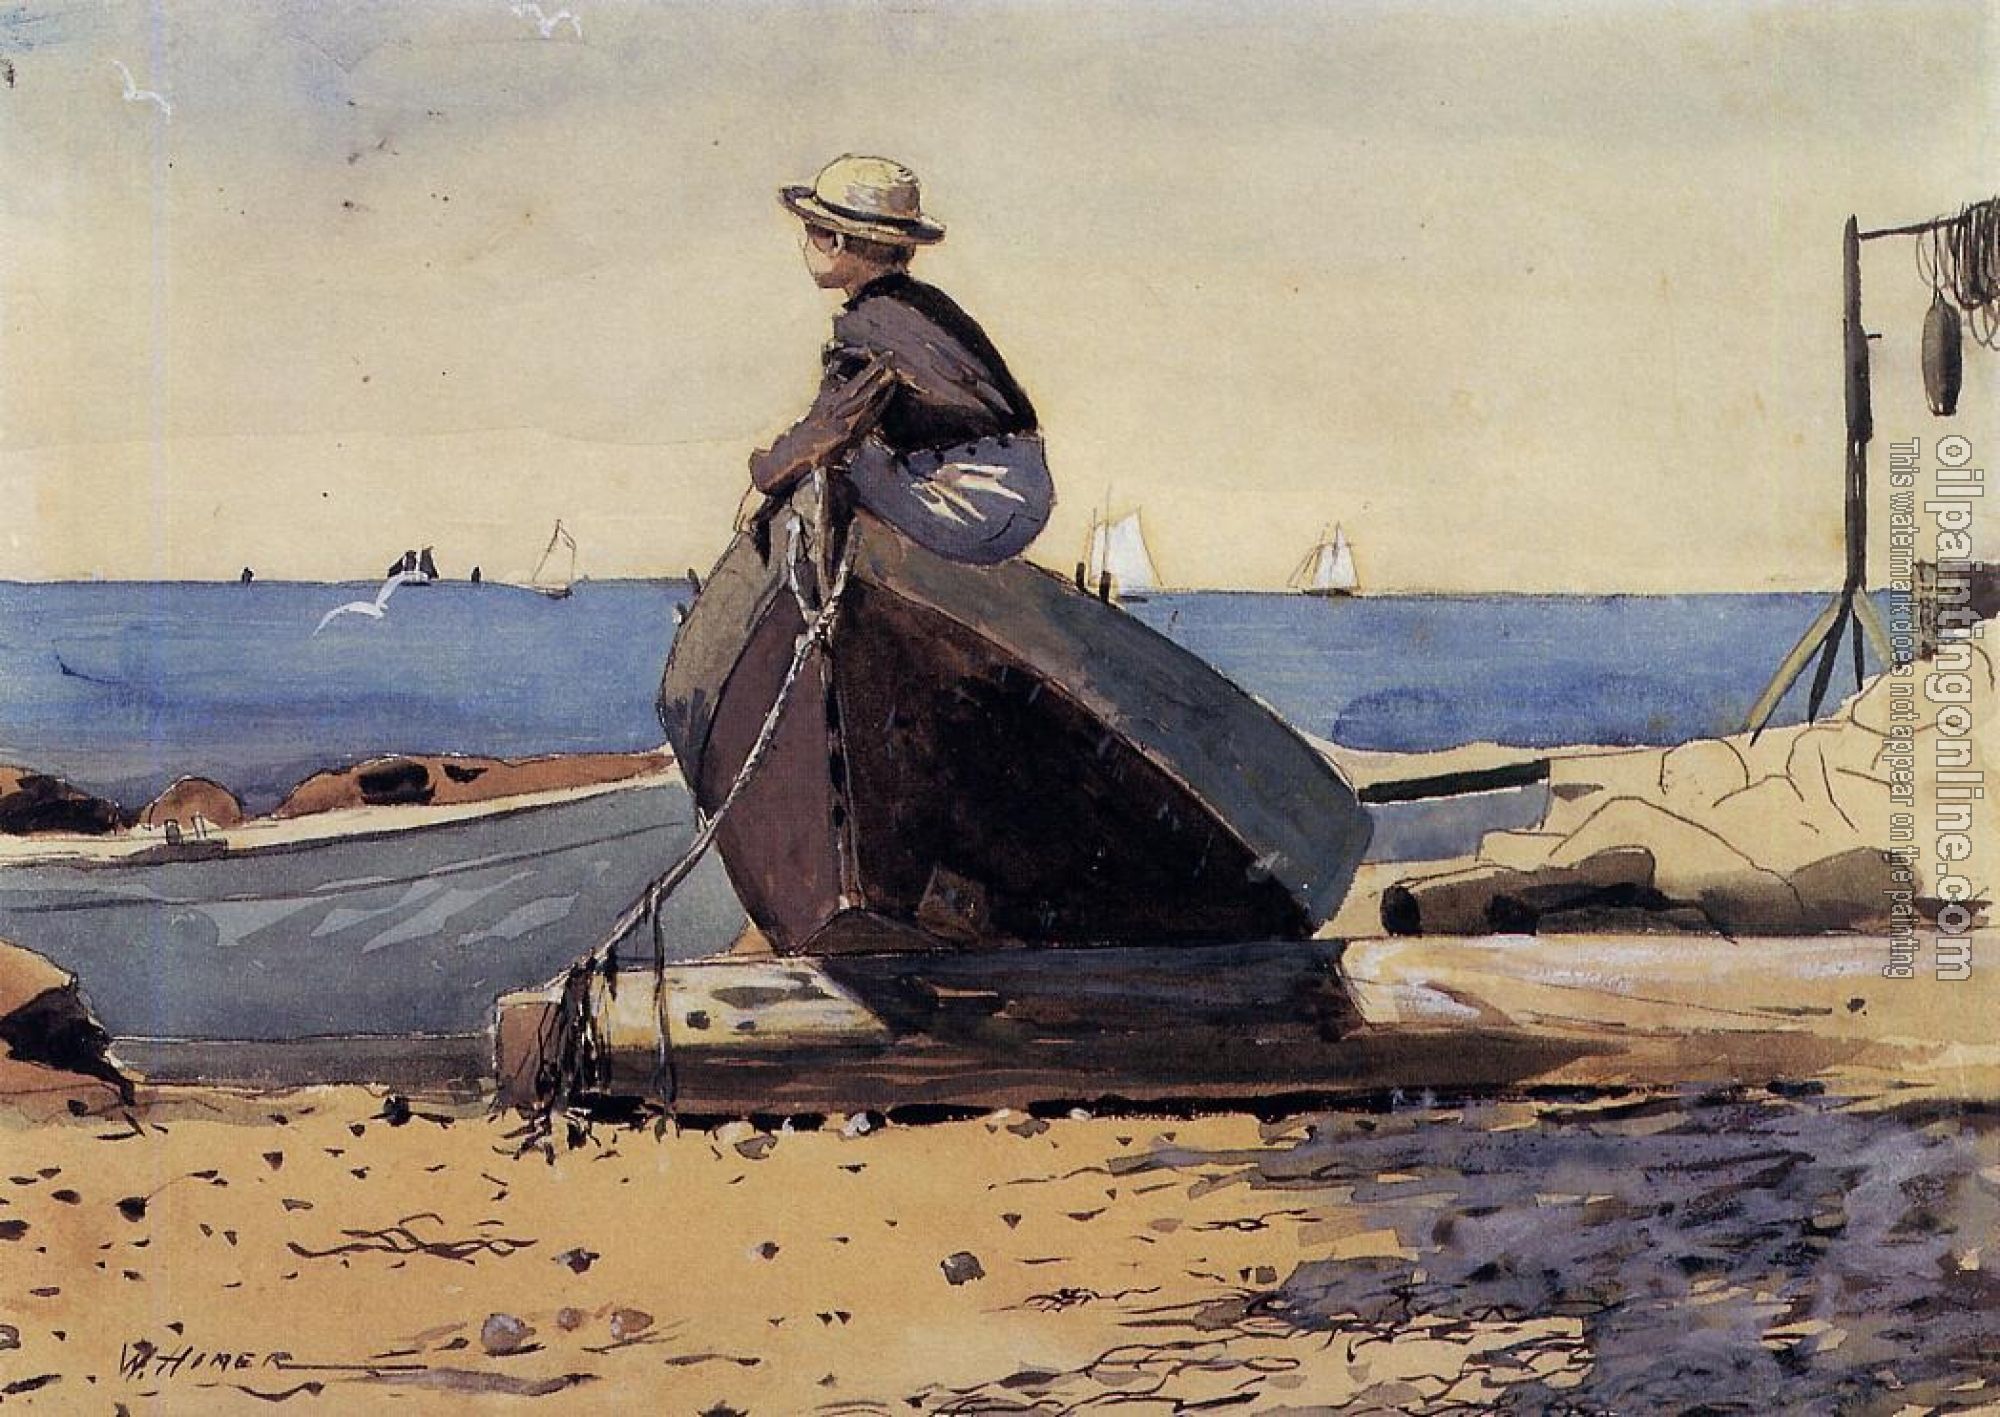 Homer, Winslow - Waiting for Dad